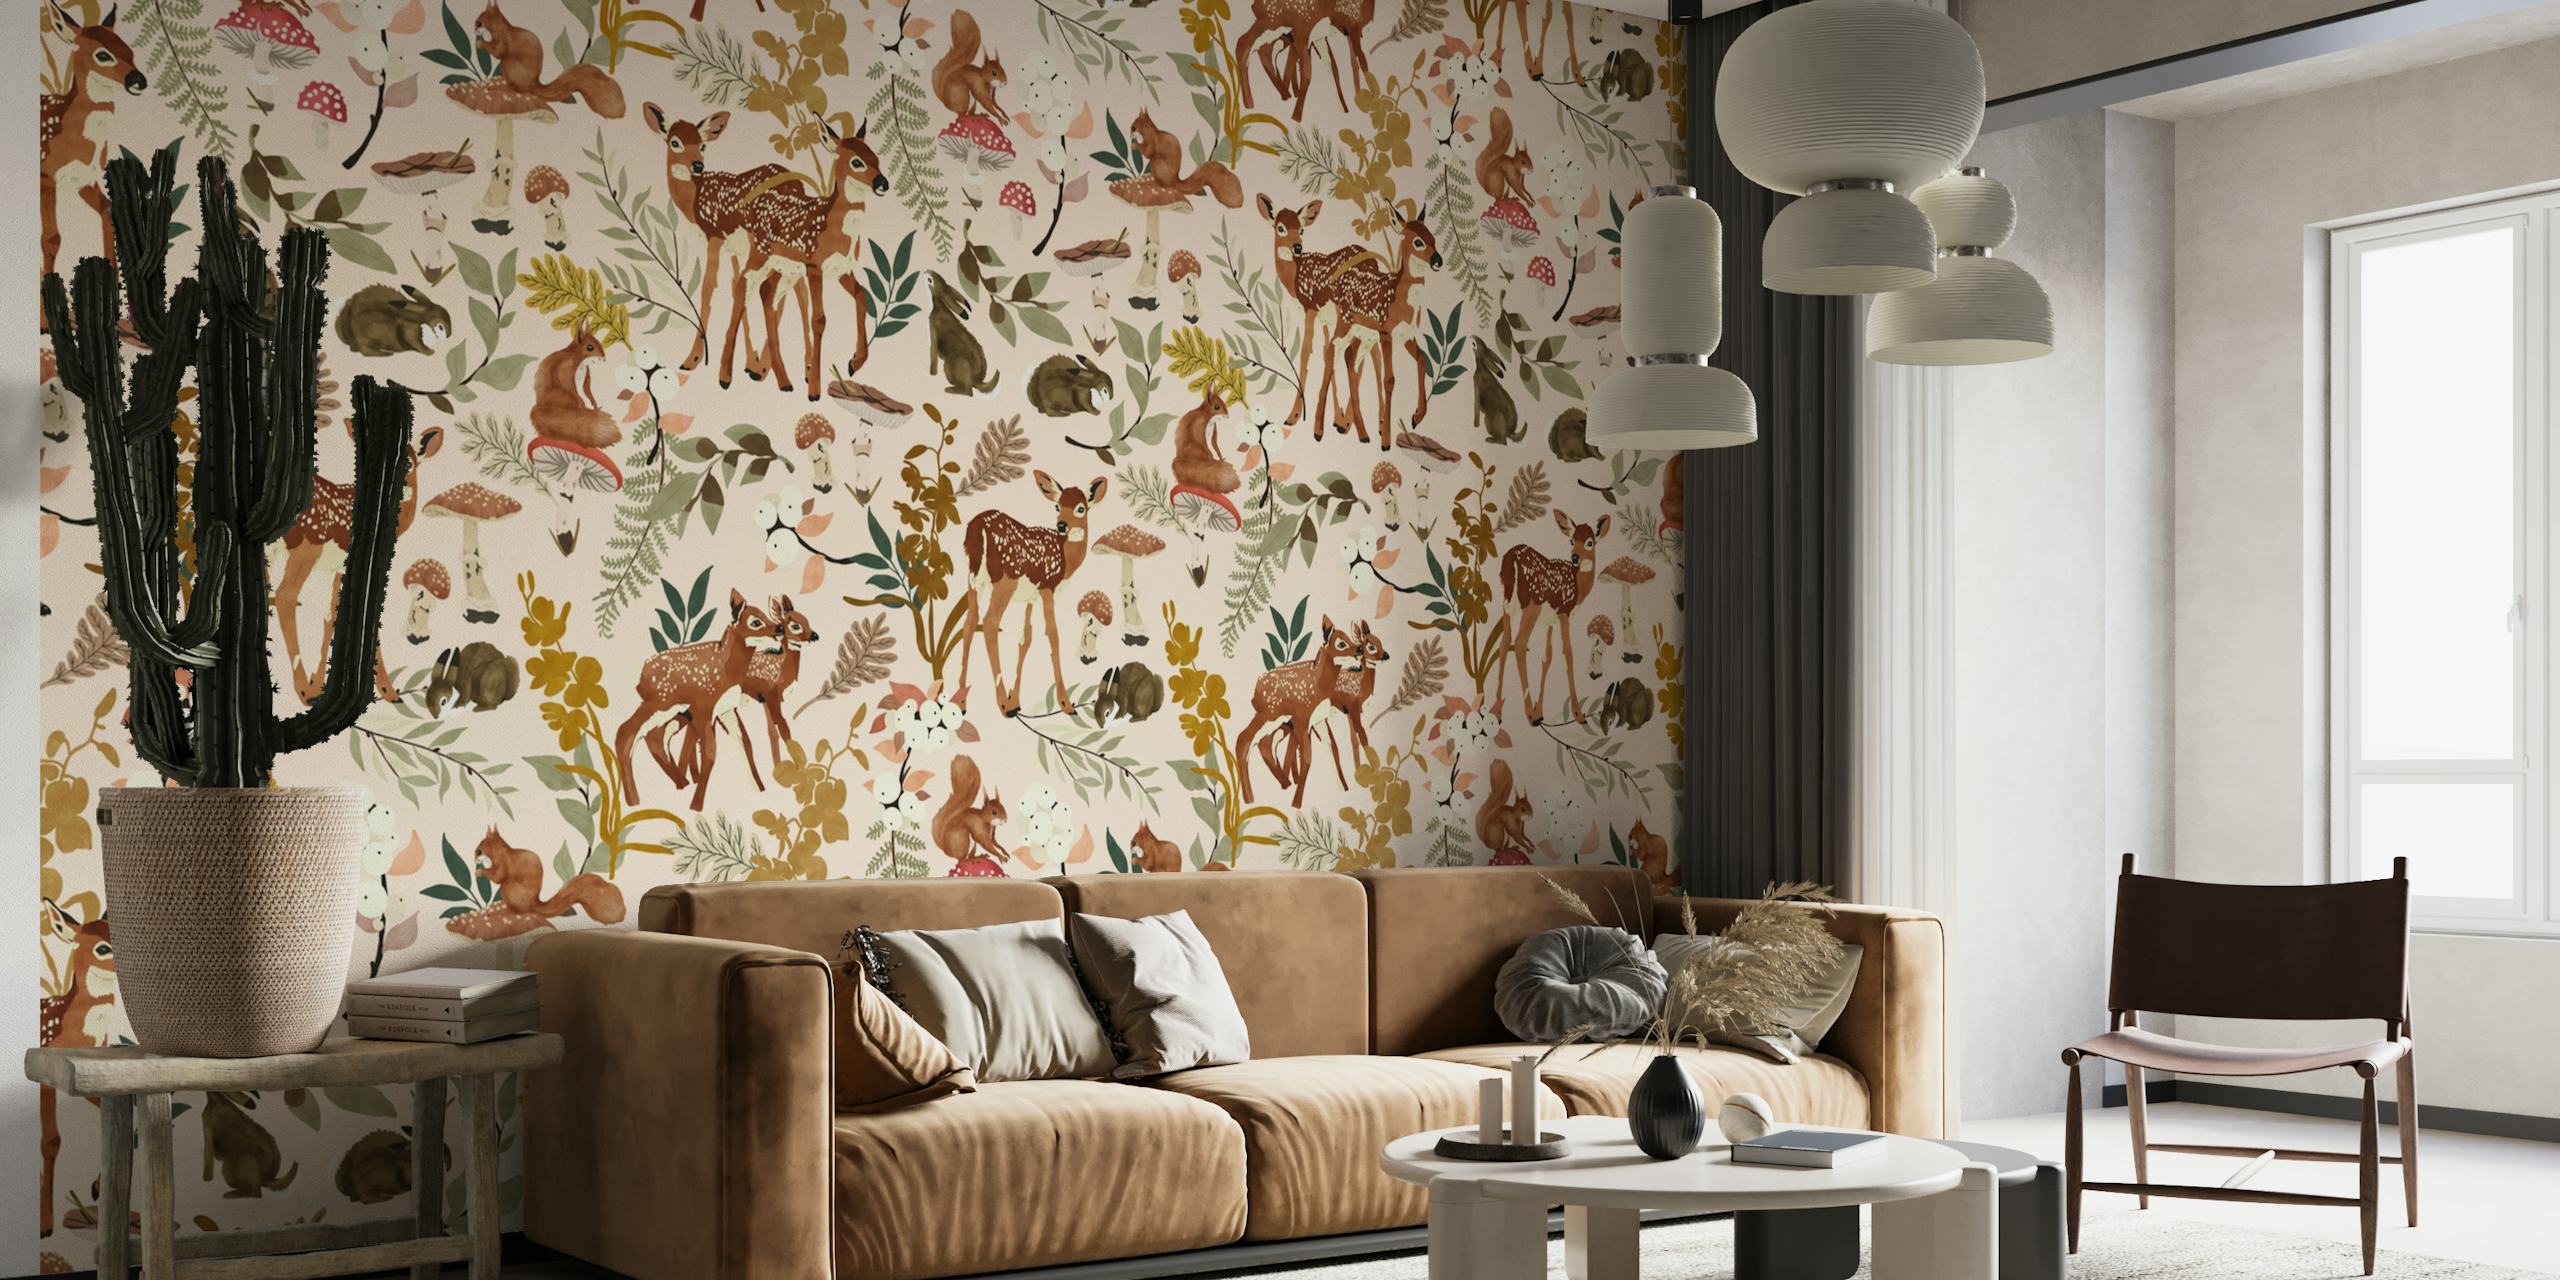 Fawns and autumn leaves pattern wall mural